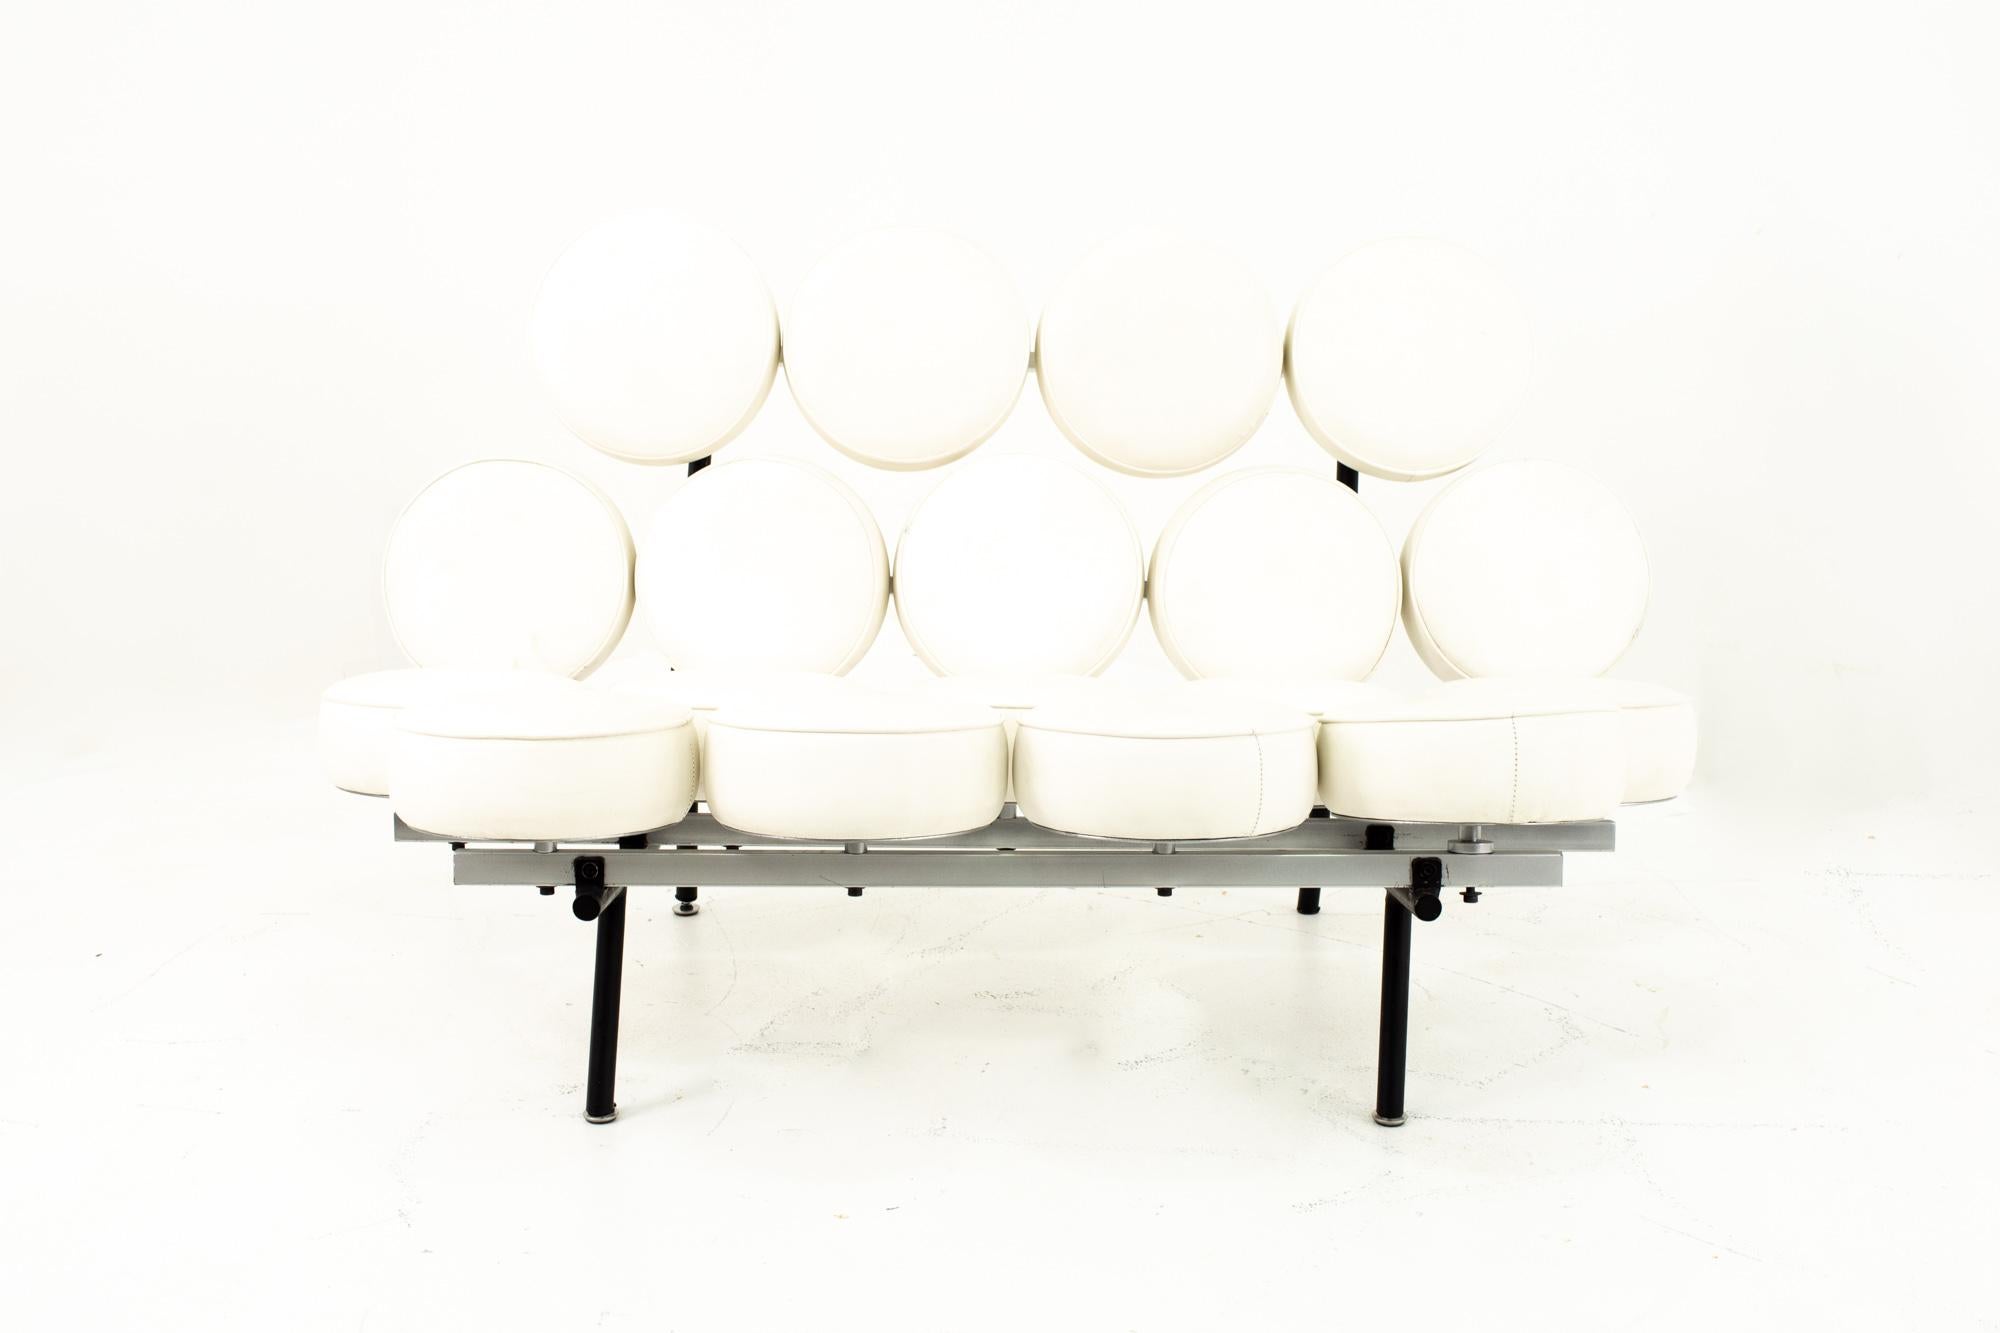 George Nelson for Herman Miller style midcentury marshmallow sofa white
Sofa measures: 52 wide x 29 deep x 32 high with a seat height of 14 inches

This piece is available in what we call restored vintage condition. Upon purchase, it is